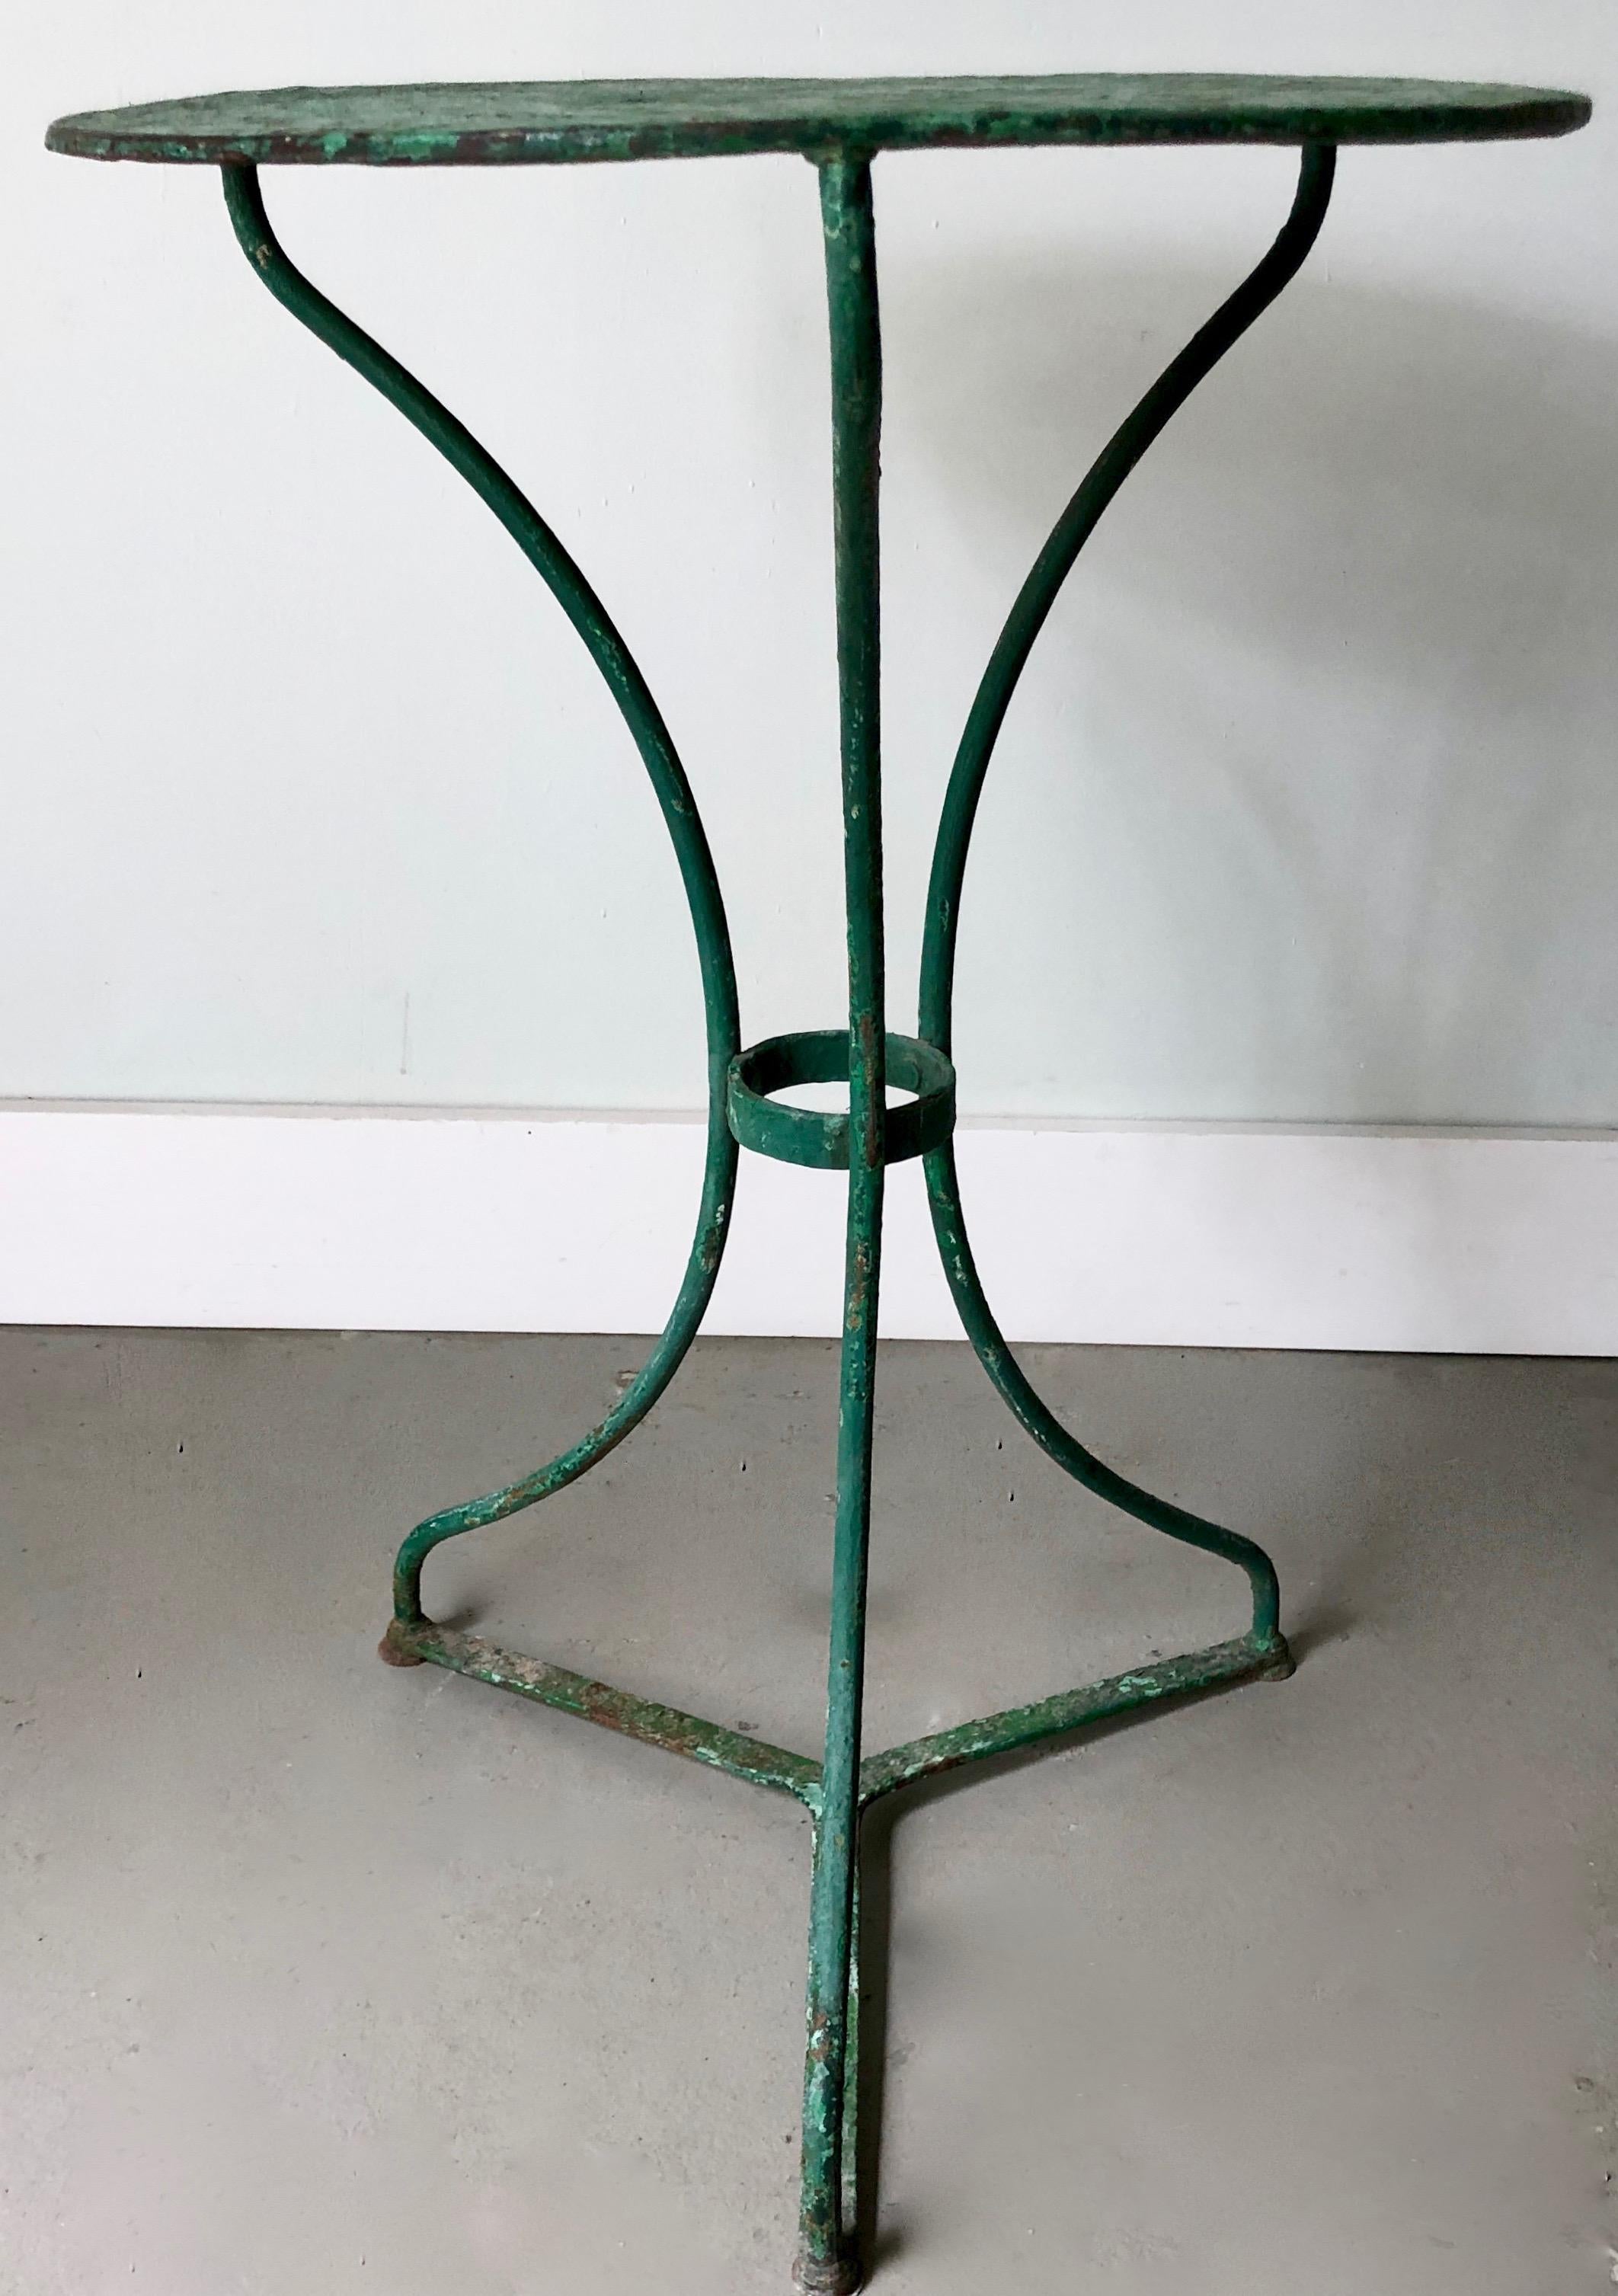 Early 20th century French bistro table with old worn layers of green/turquase tones. Riveted, with shapely wrought iron legs and sheet metal top.